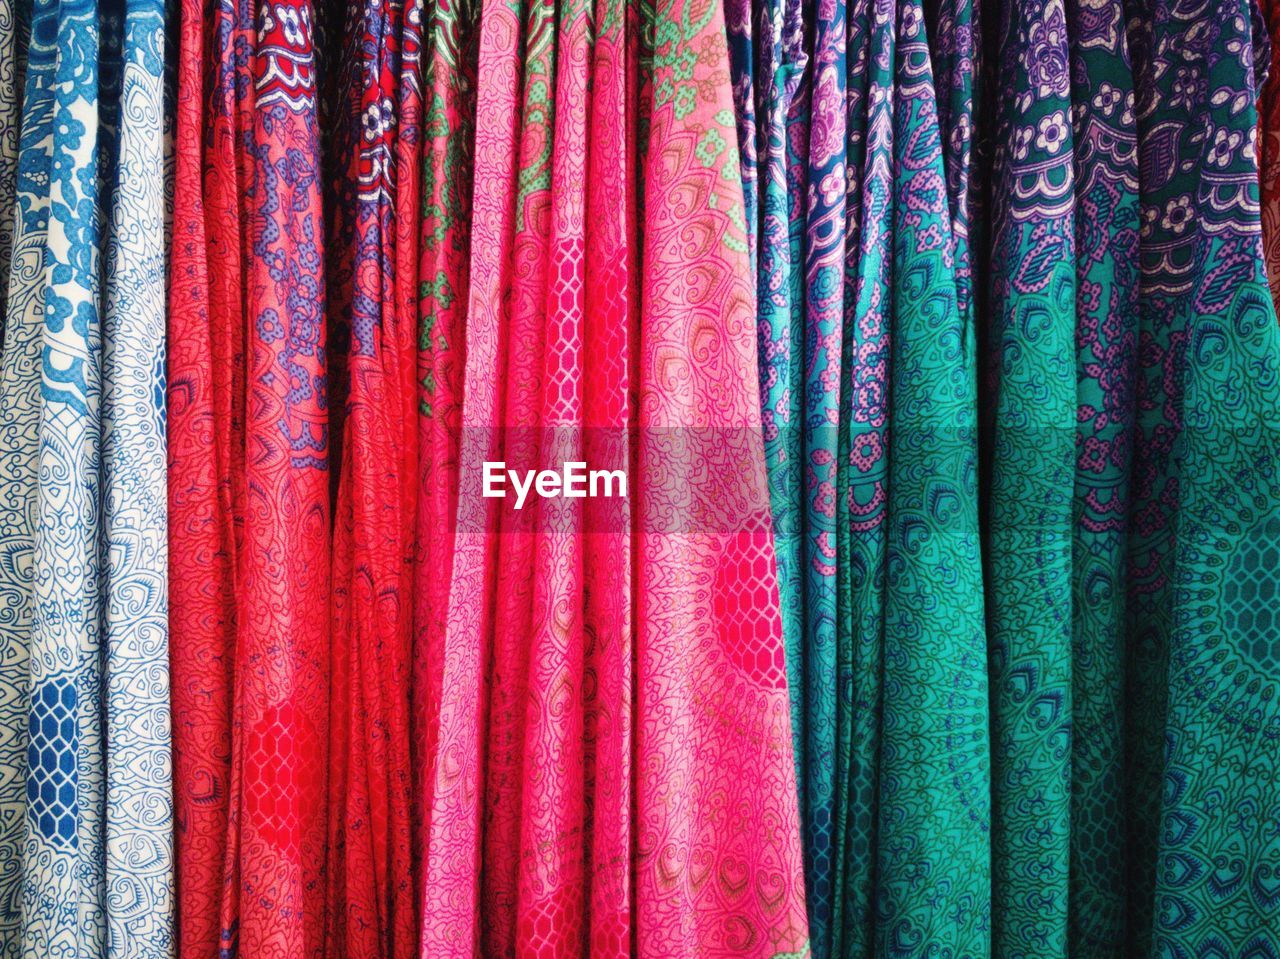 Full frame shot of colorful fabrics for sale at store